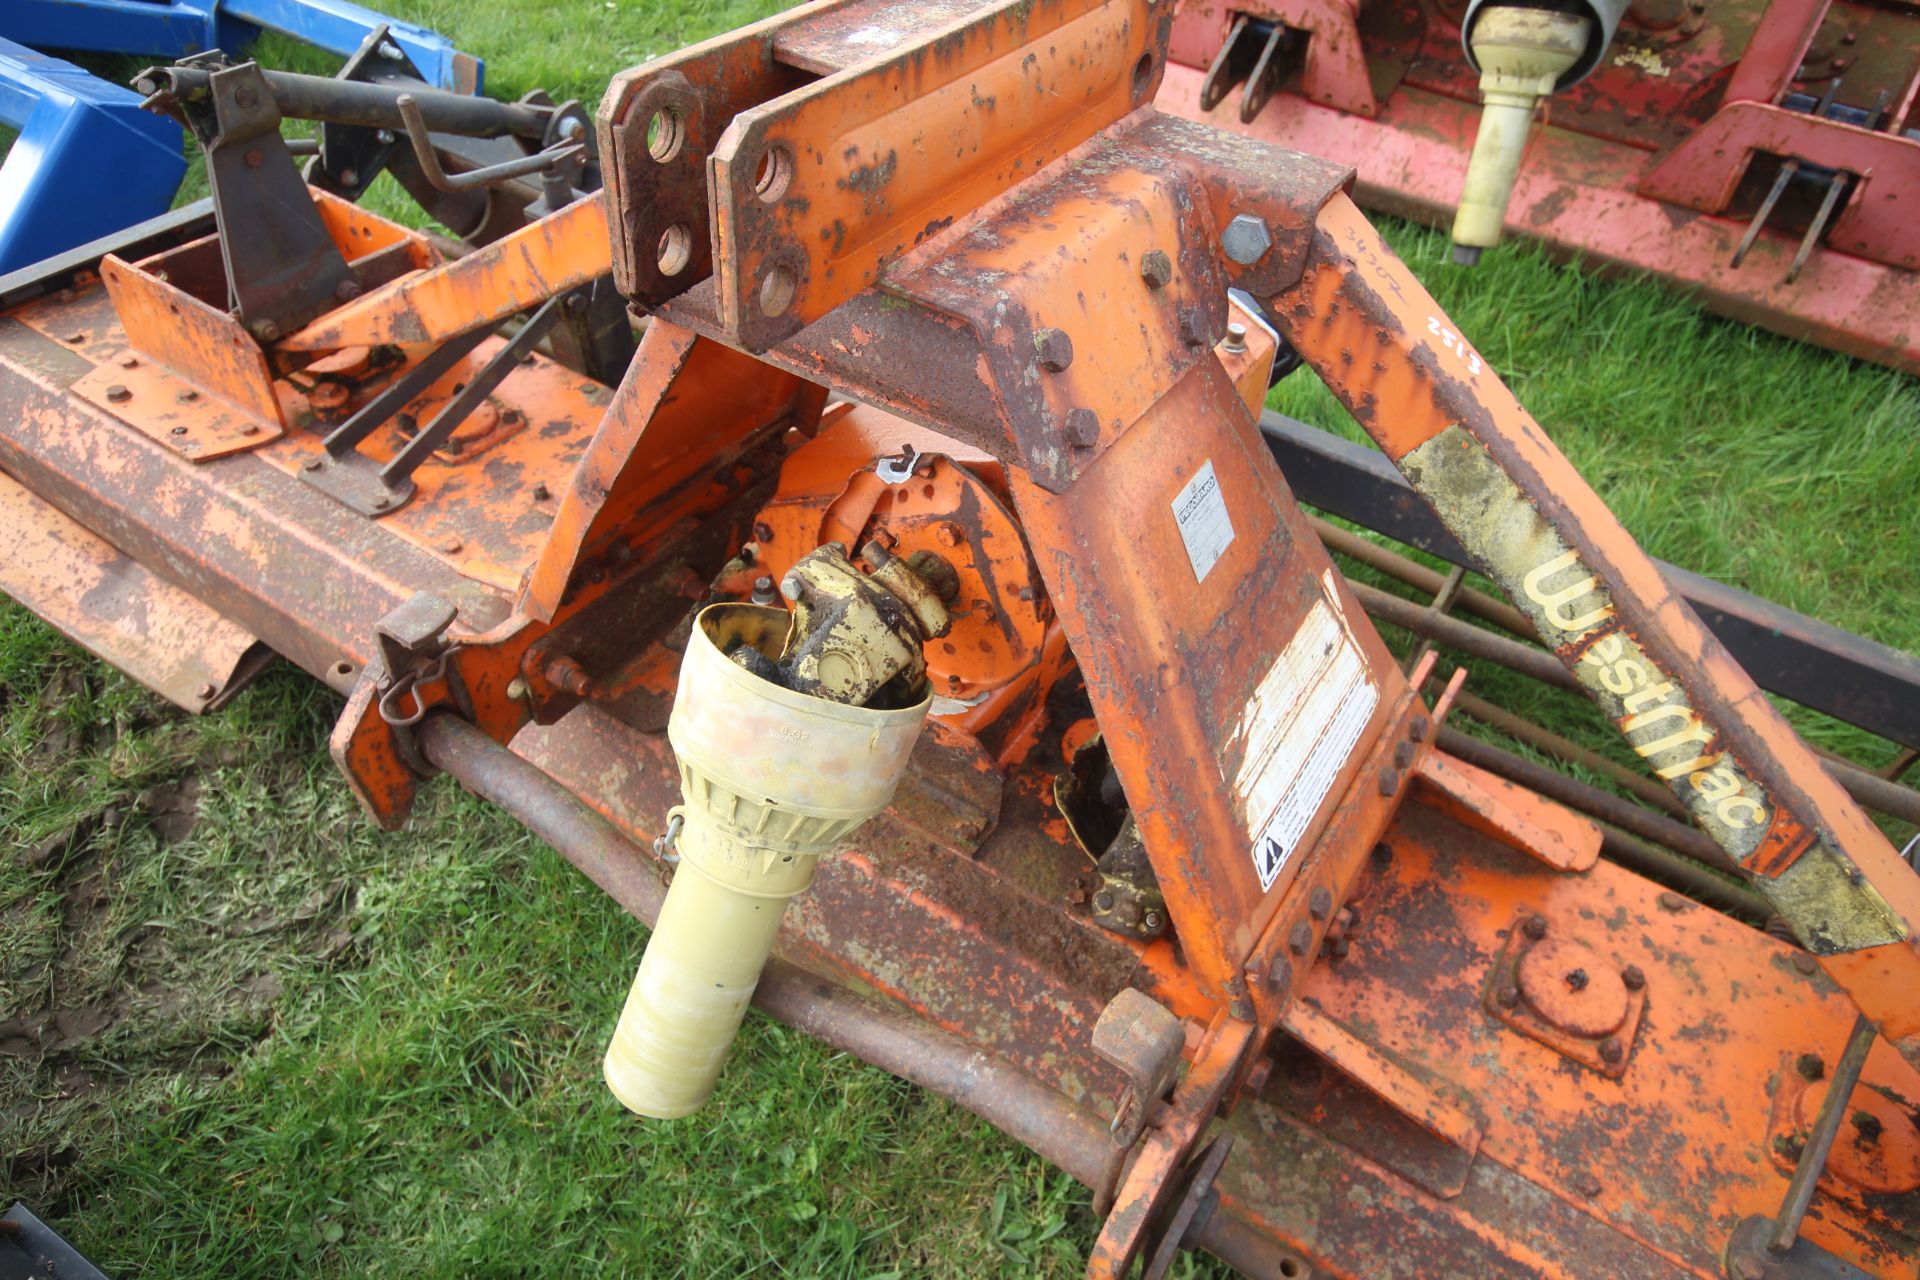 Westmac Pegararo 3m power harrow. Vendor reports owned since 2001 and used regularly. For sale due - Bild 2 aus 16